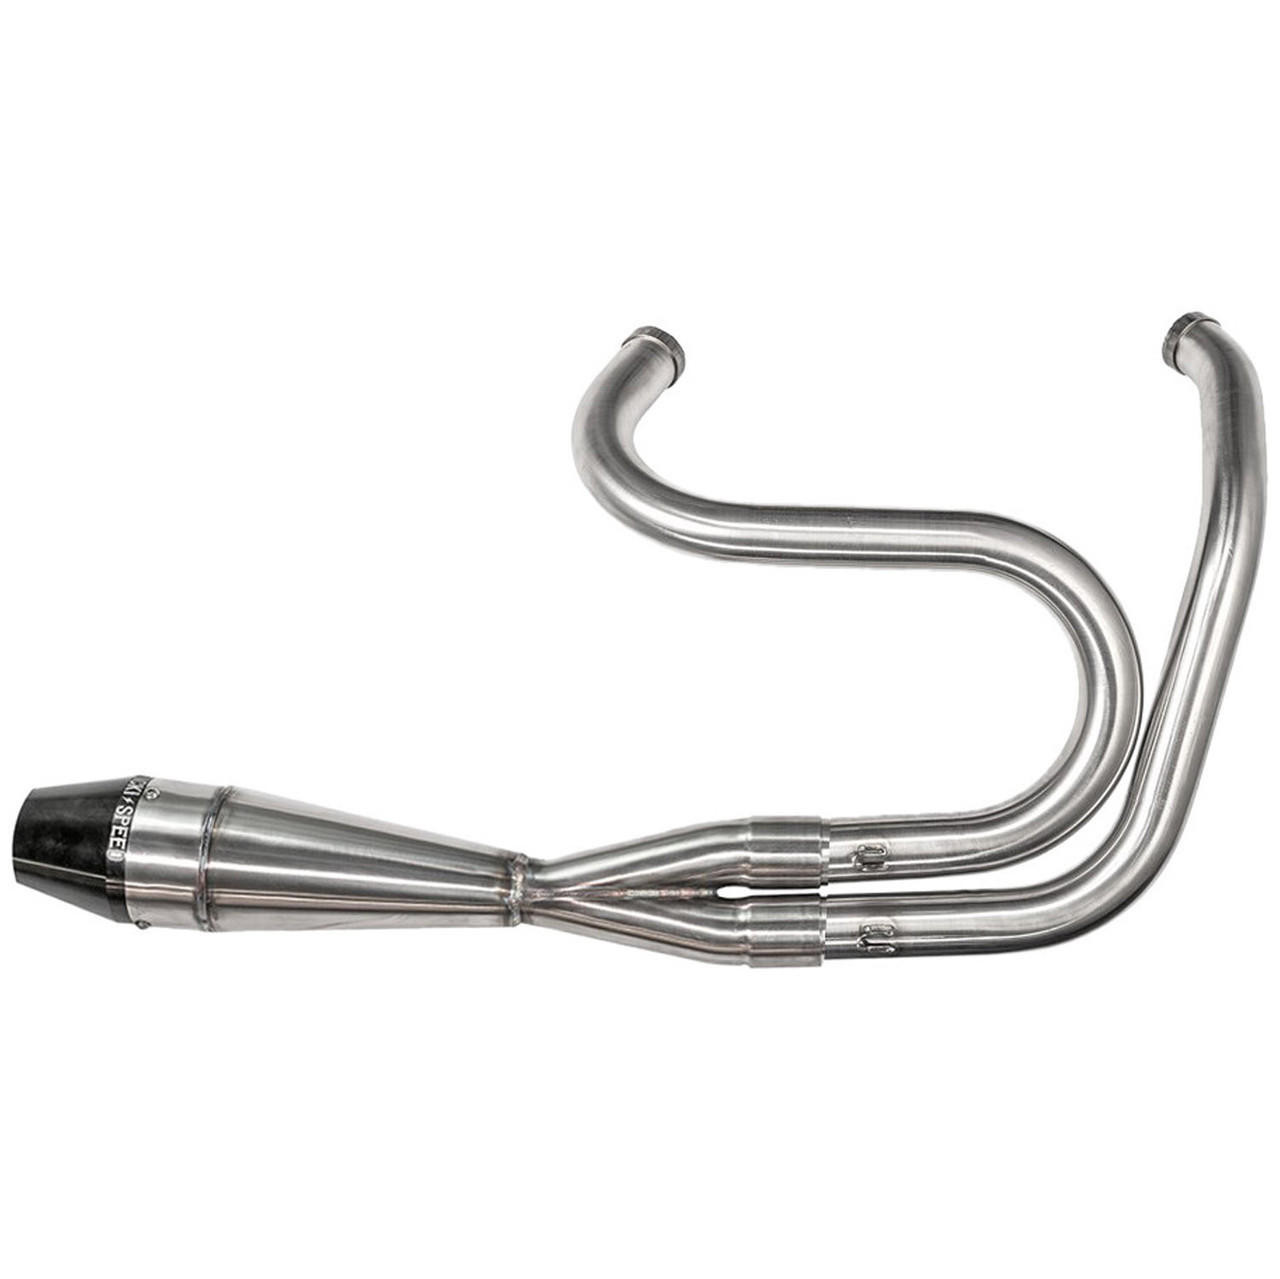 Sawicki - Brushed Stainless Steel 2-in-1 Shorty Exhaust fits '04 & Up  Sportster Models